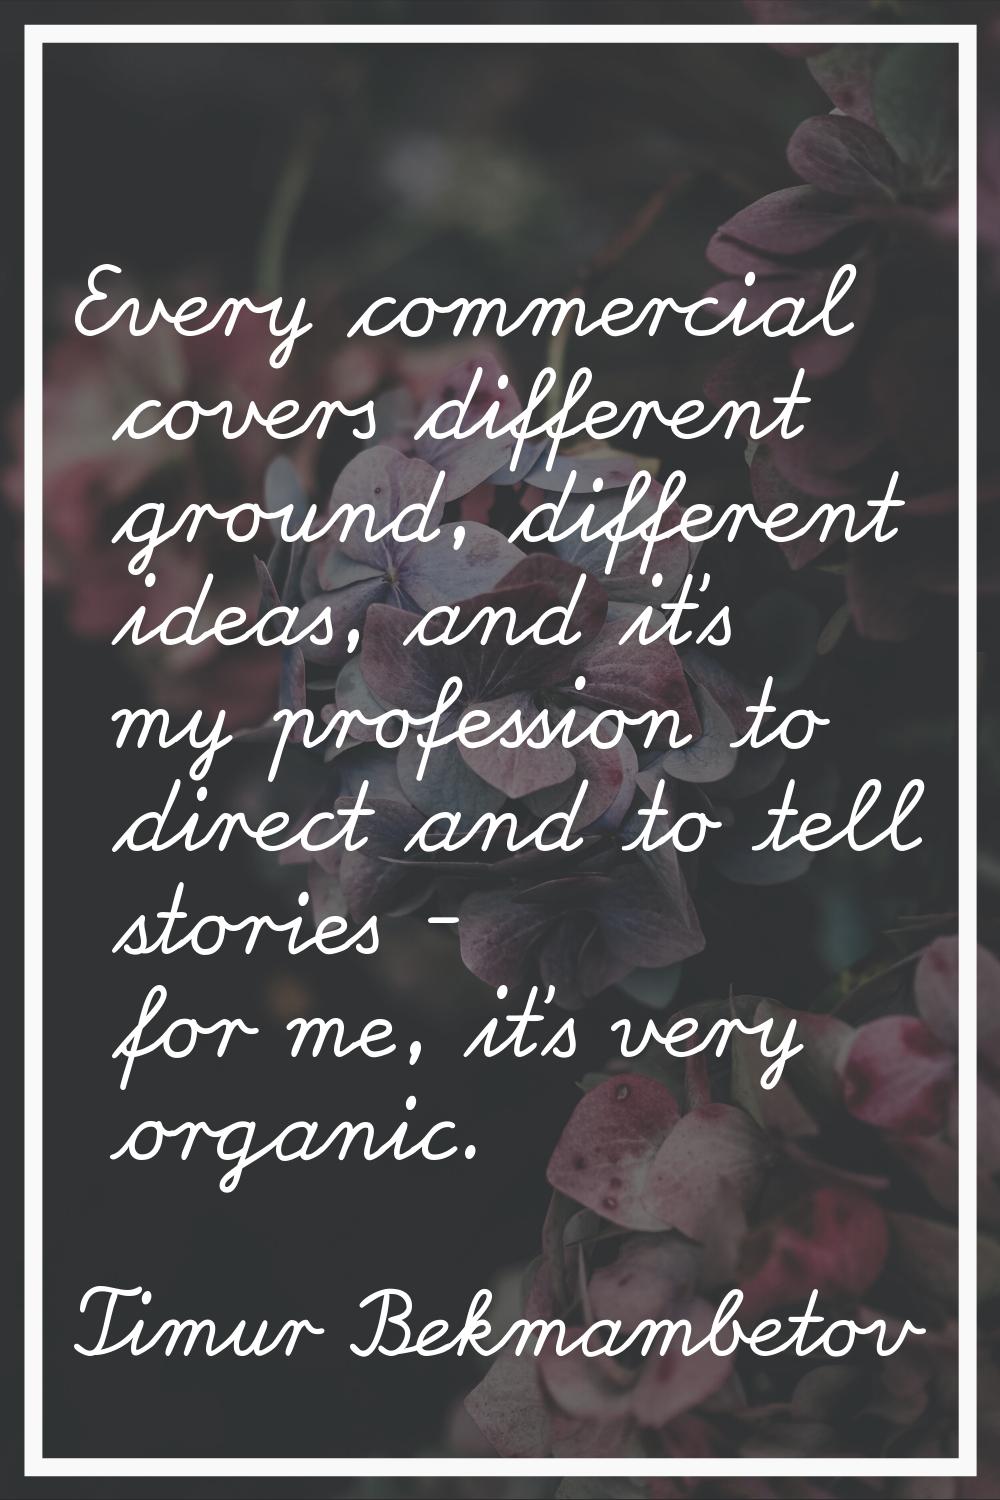 Every commercial covers different ground, different ideas, and it's my profession to direct and to 